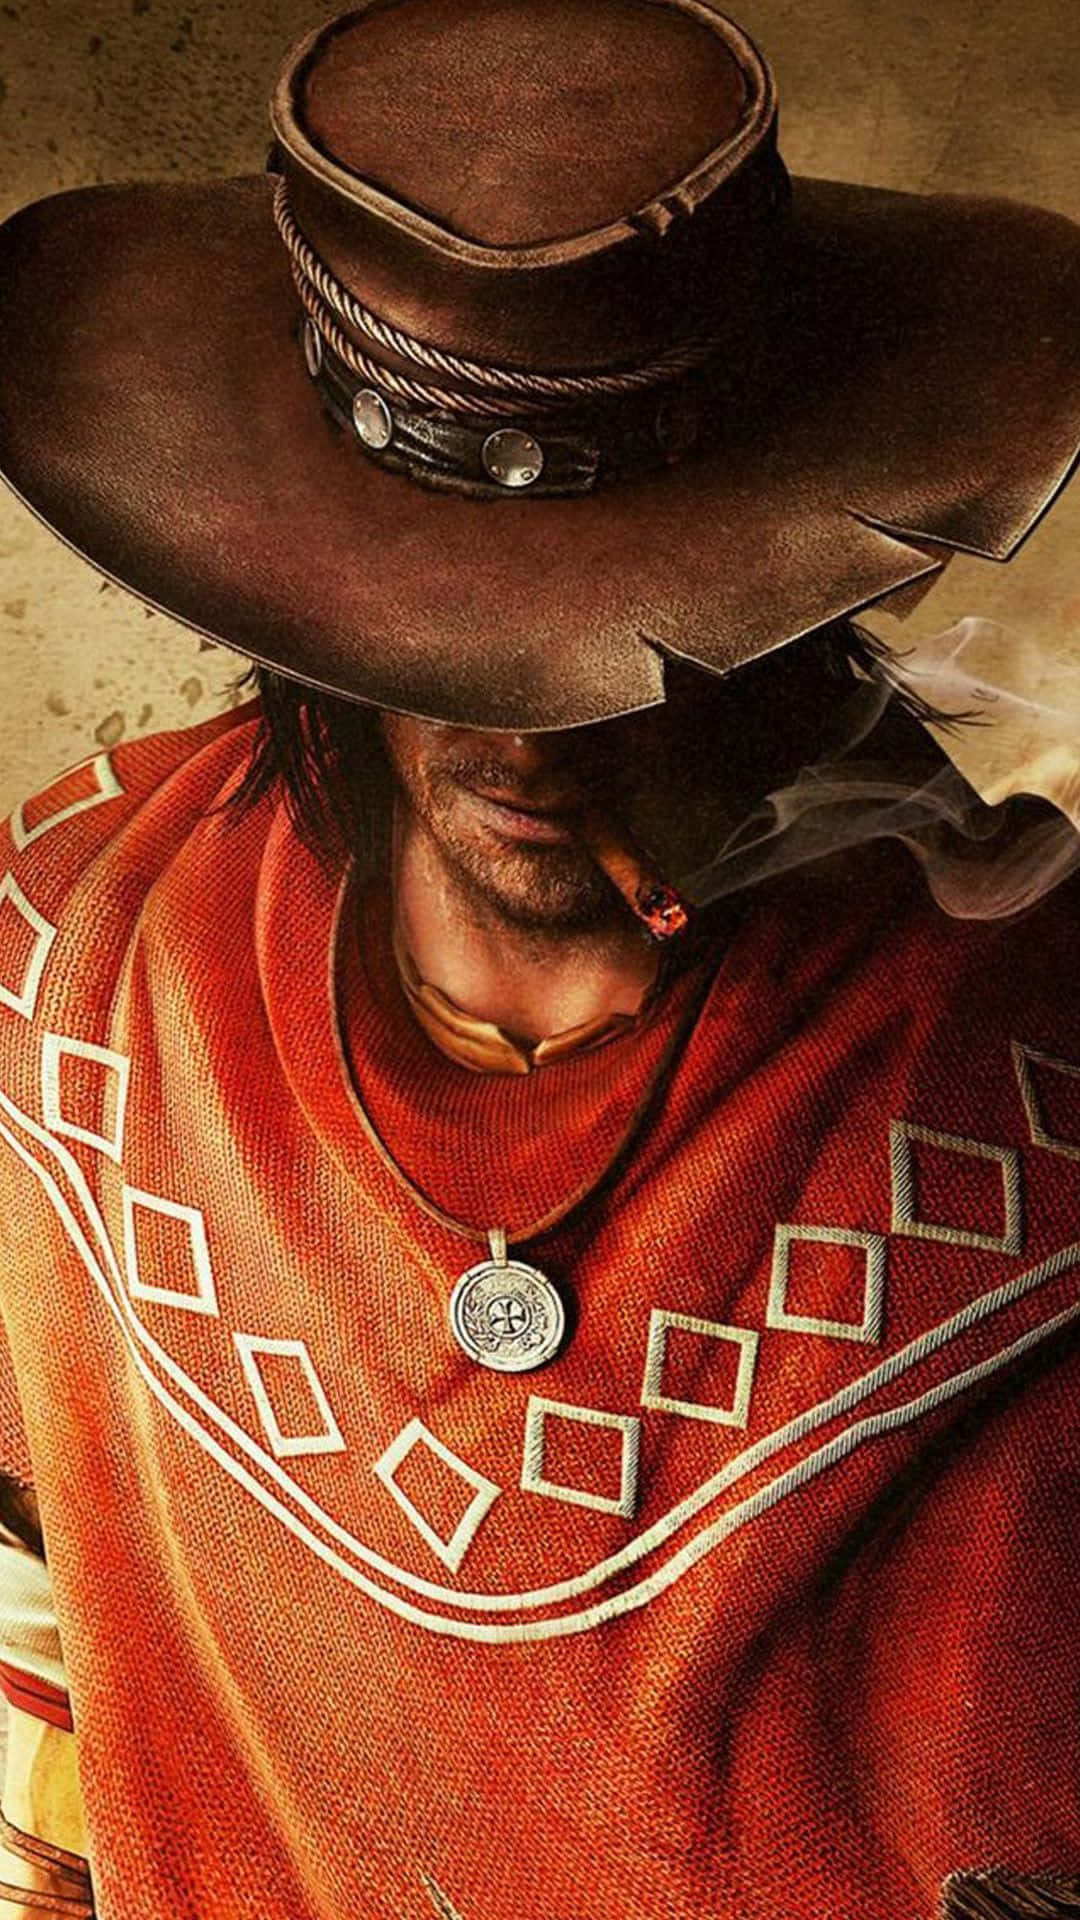 Get your Cowboy iPhone today and hit the trail! Wallpaper